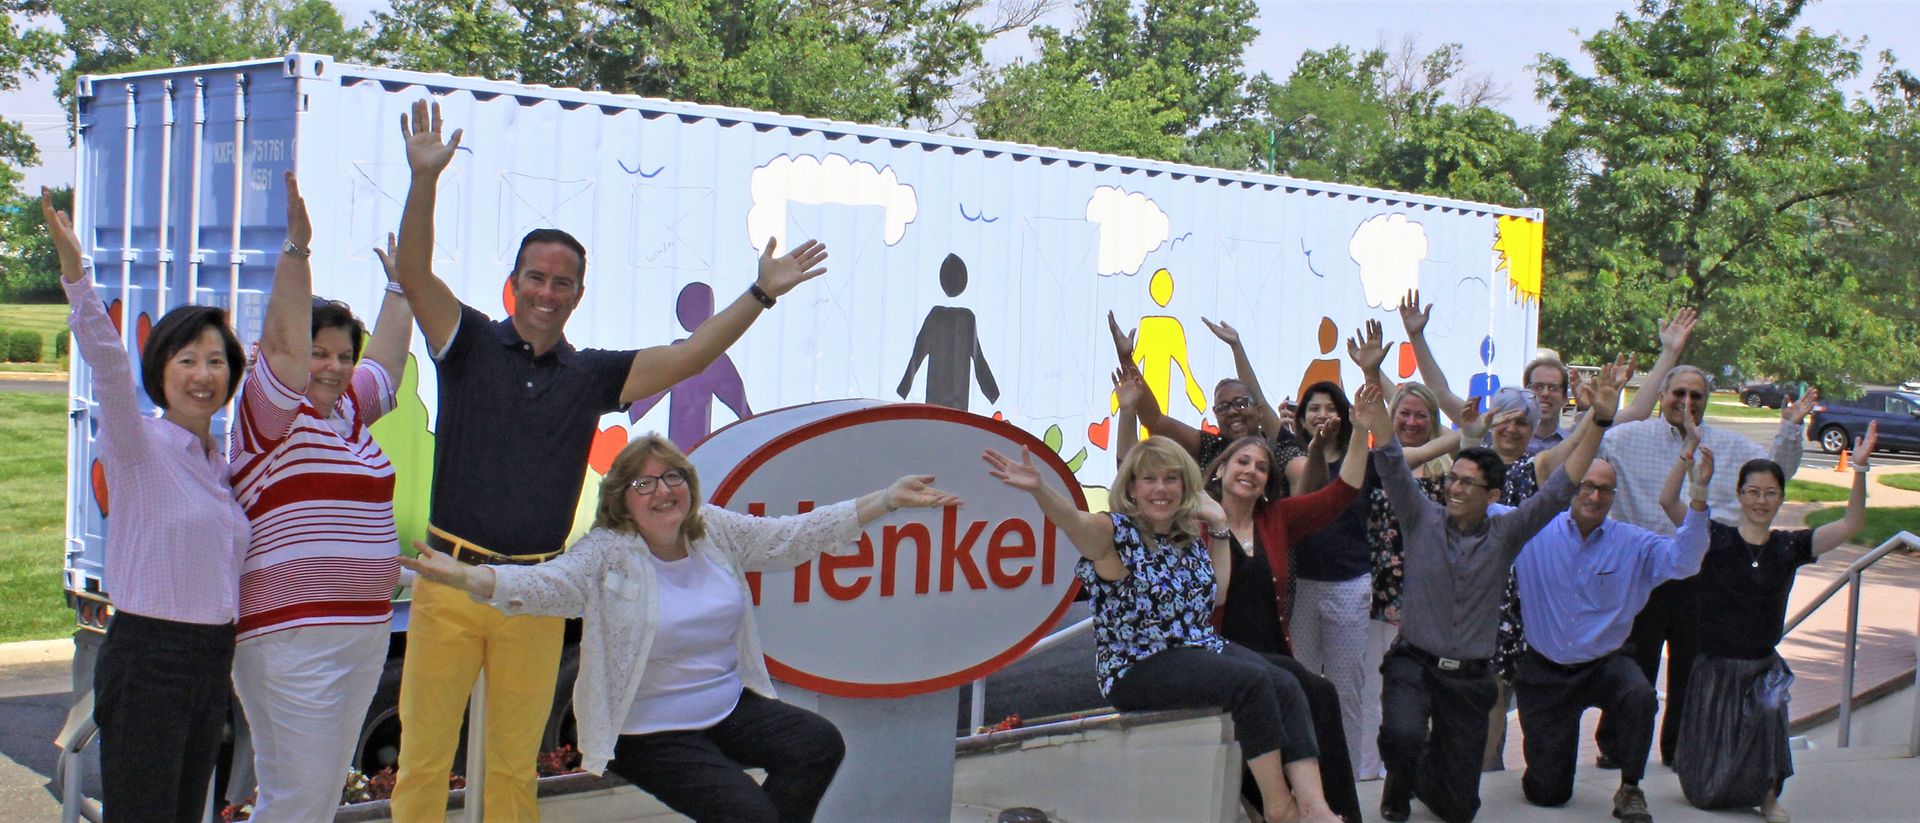 Employees excitedly bid the container-turned-classroom a hearty farewell.